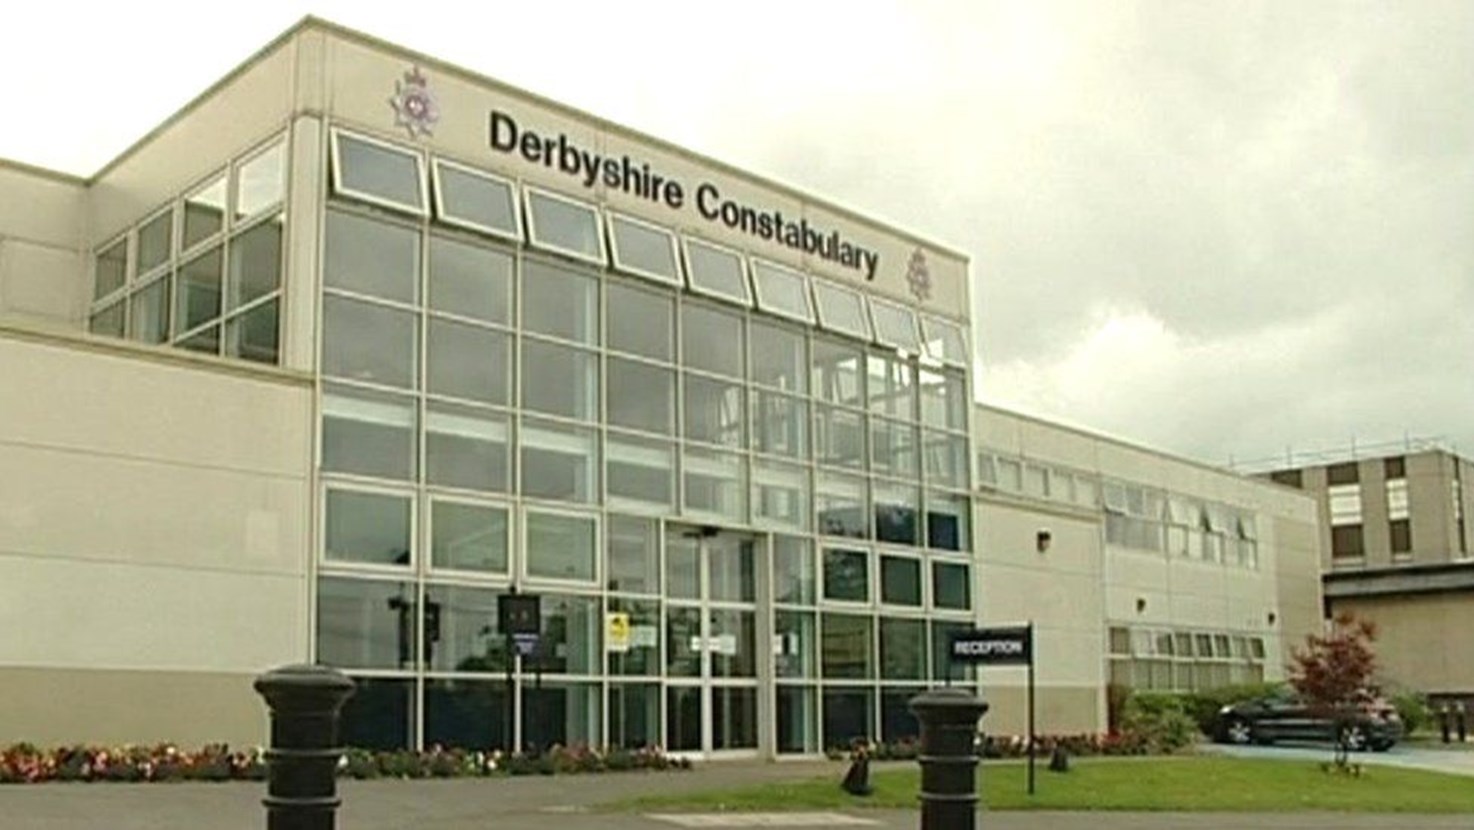 View all of the events and meetings that PCC Marc Jones attended or hosted at Derbyshire Police HQ in 2022